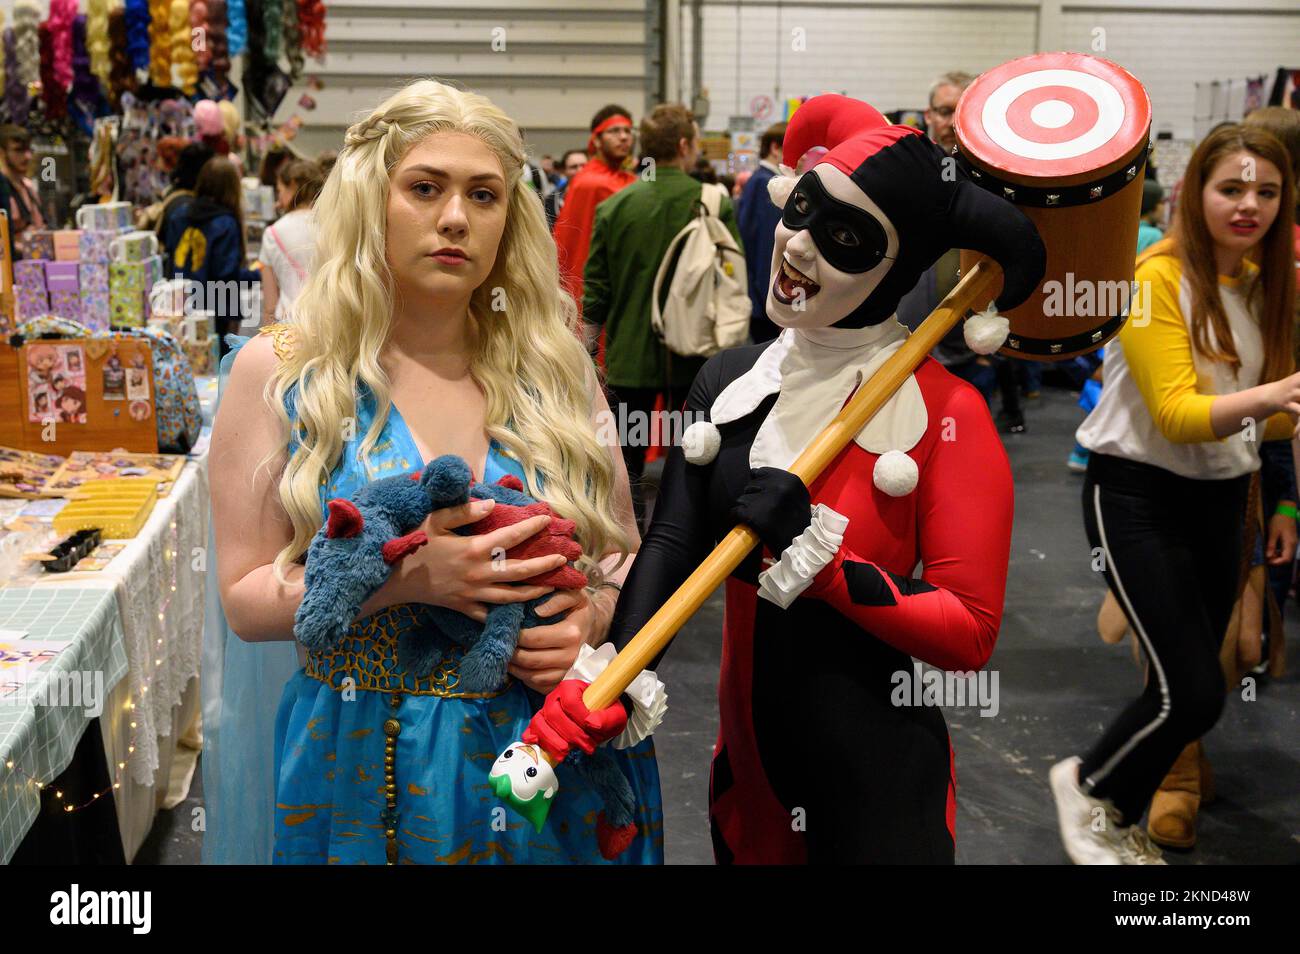 Harley Quinn cosplay at MCM Comic Con in London Stock Photo